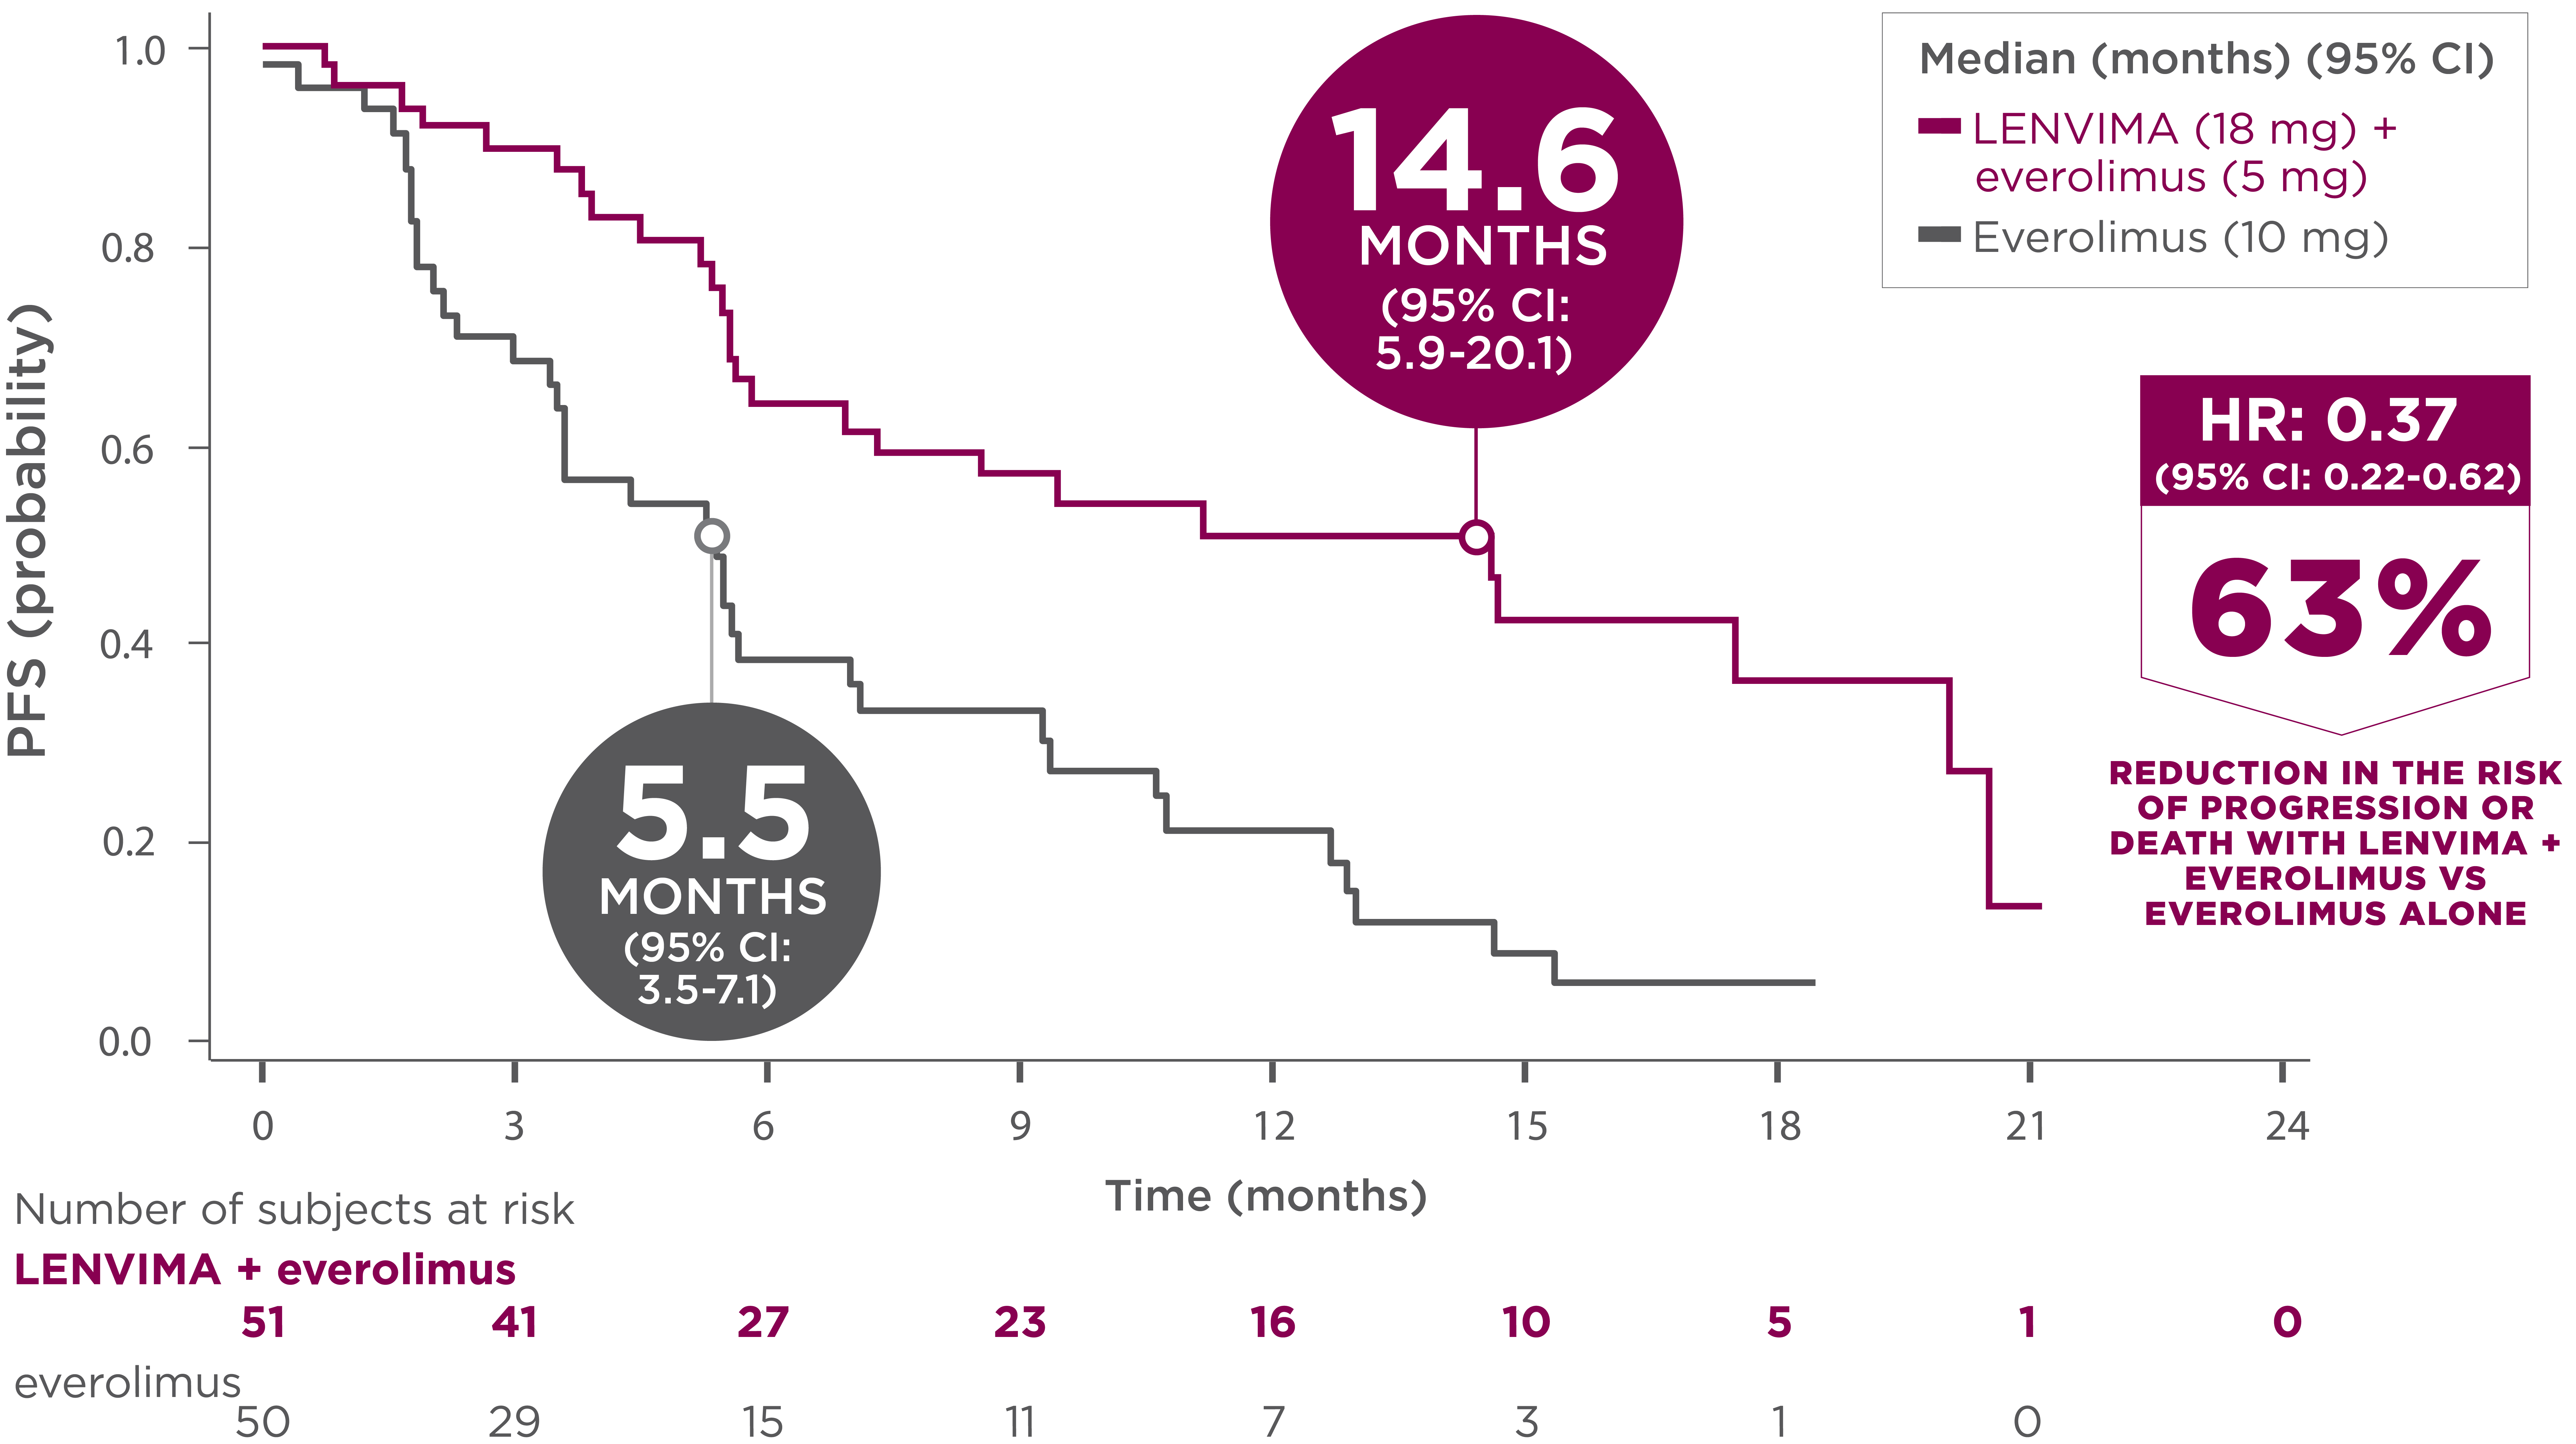 LENVIMA achieved 14.6 months median PFS with the combination.